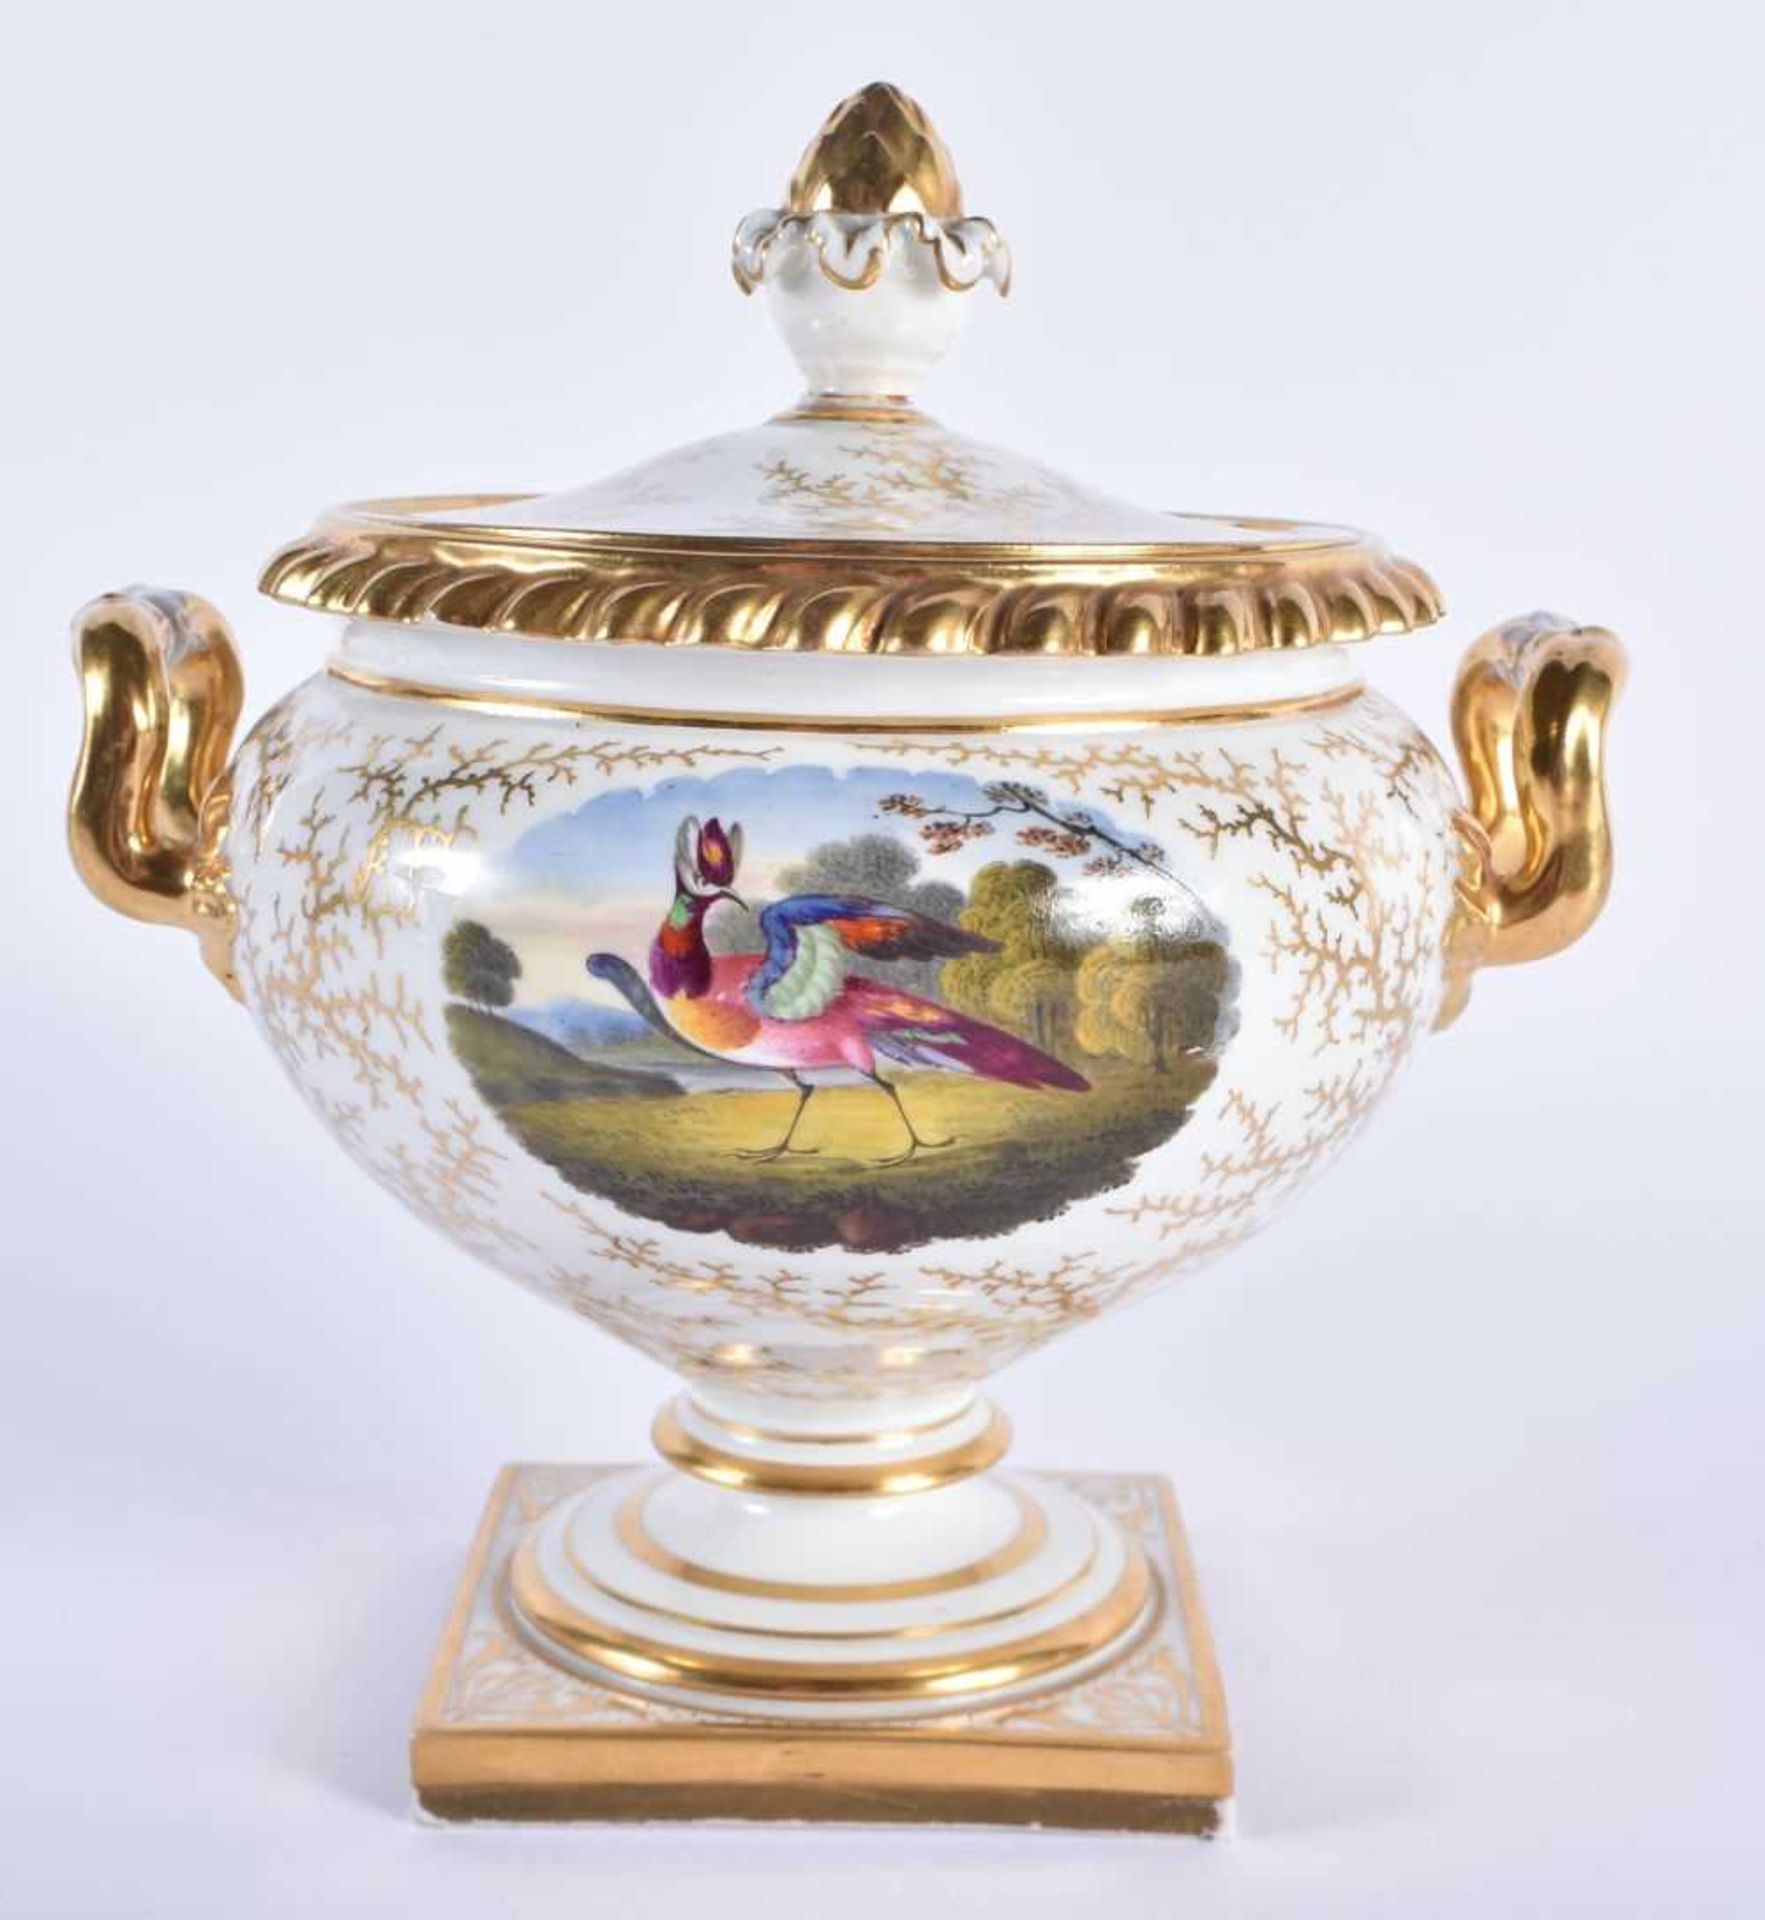 A FINE EARLY 19TH CENTURY FLIGHT BARR AND BARR WORCESTER DESSERT SERVICE painted with landscapes and - Image 11 of 32